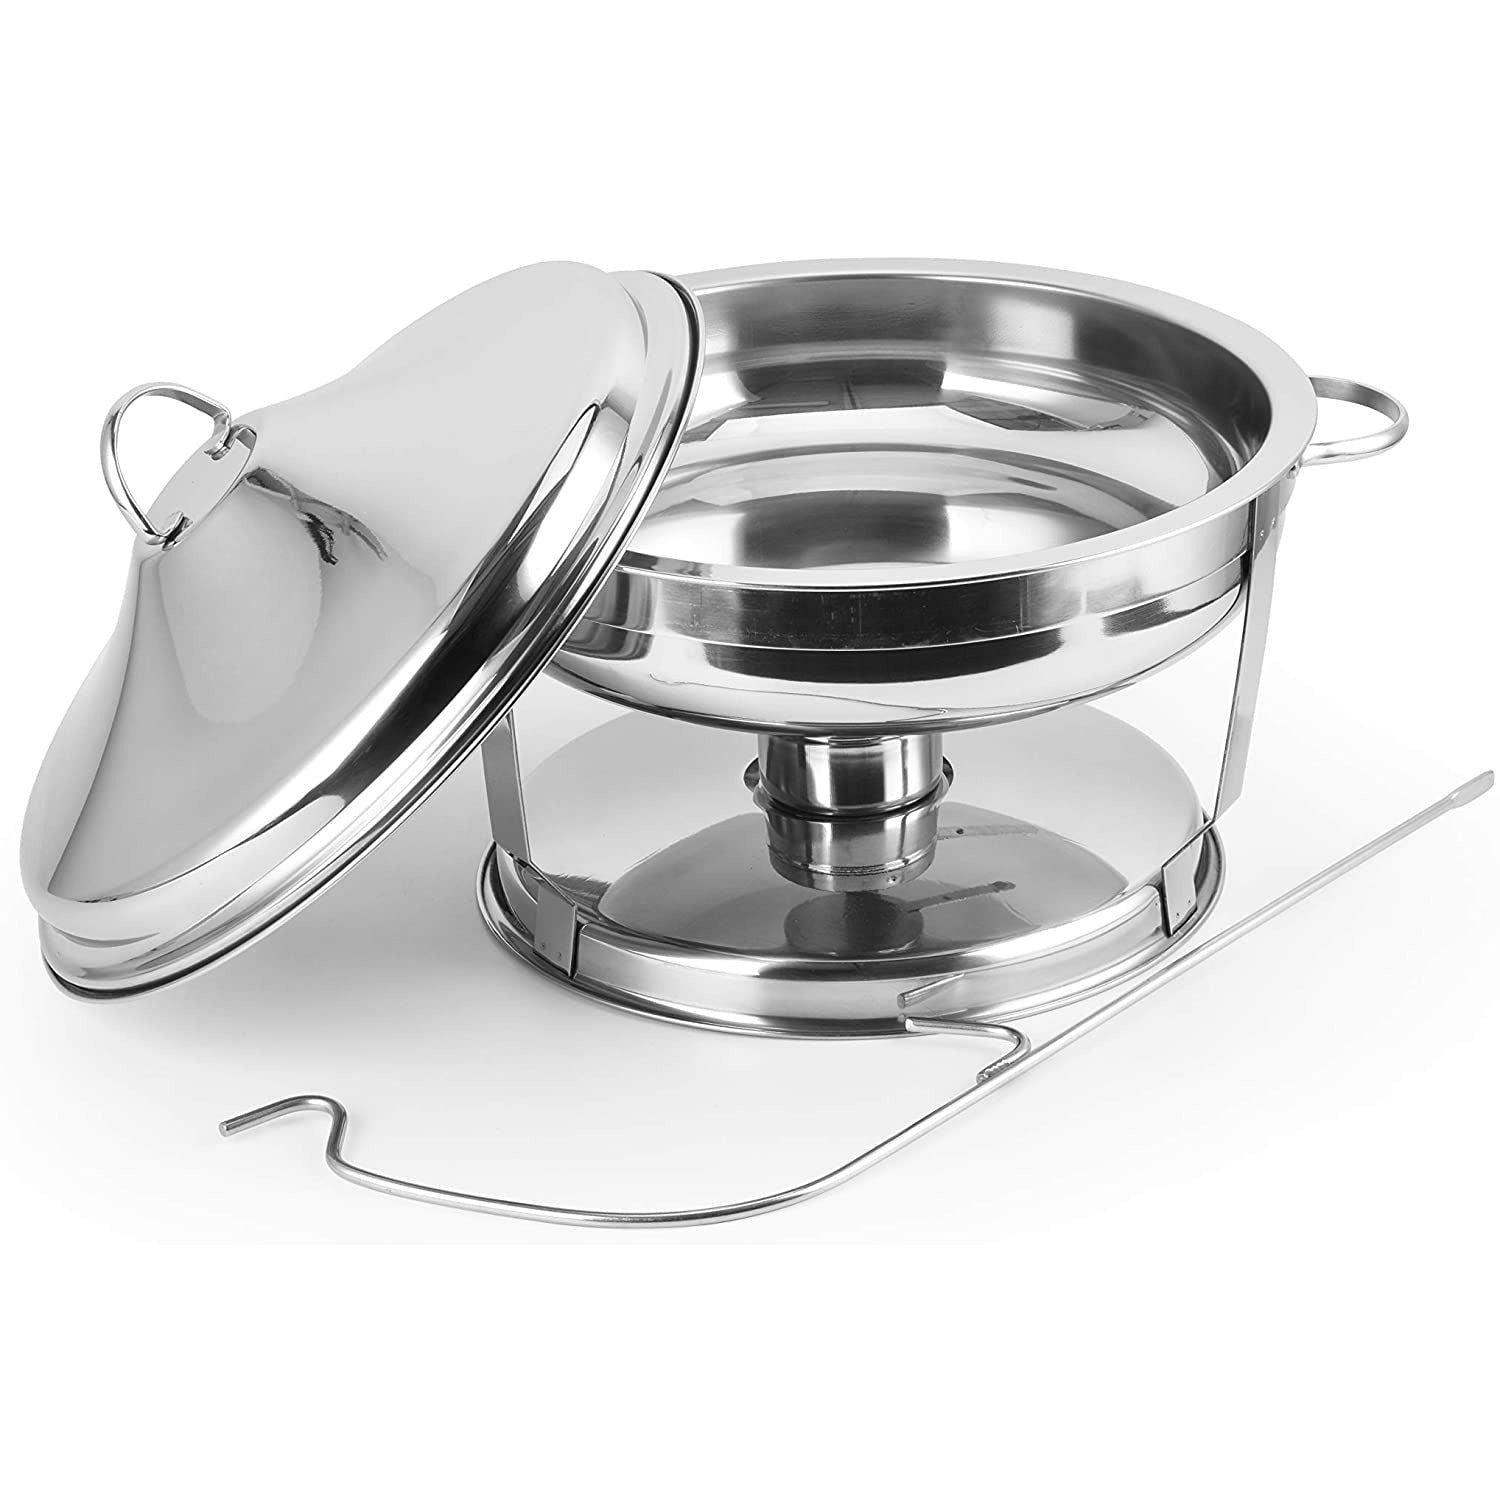 Round Chafing Dish With Hanger Stainless Steel 6 Quart